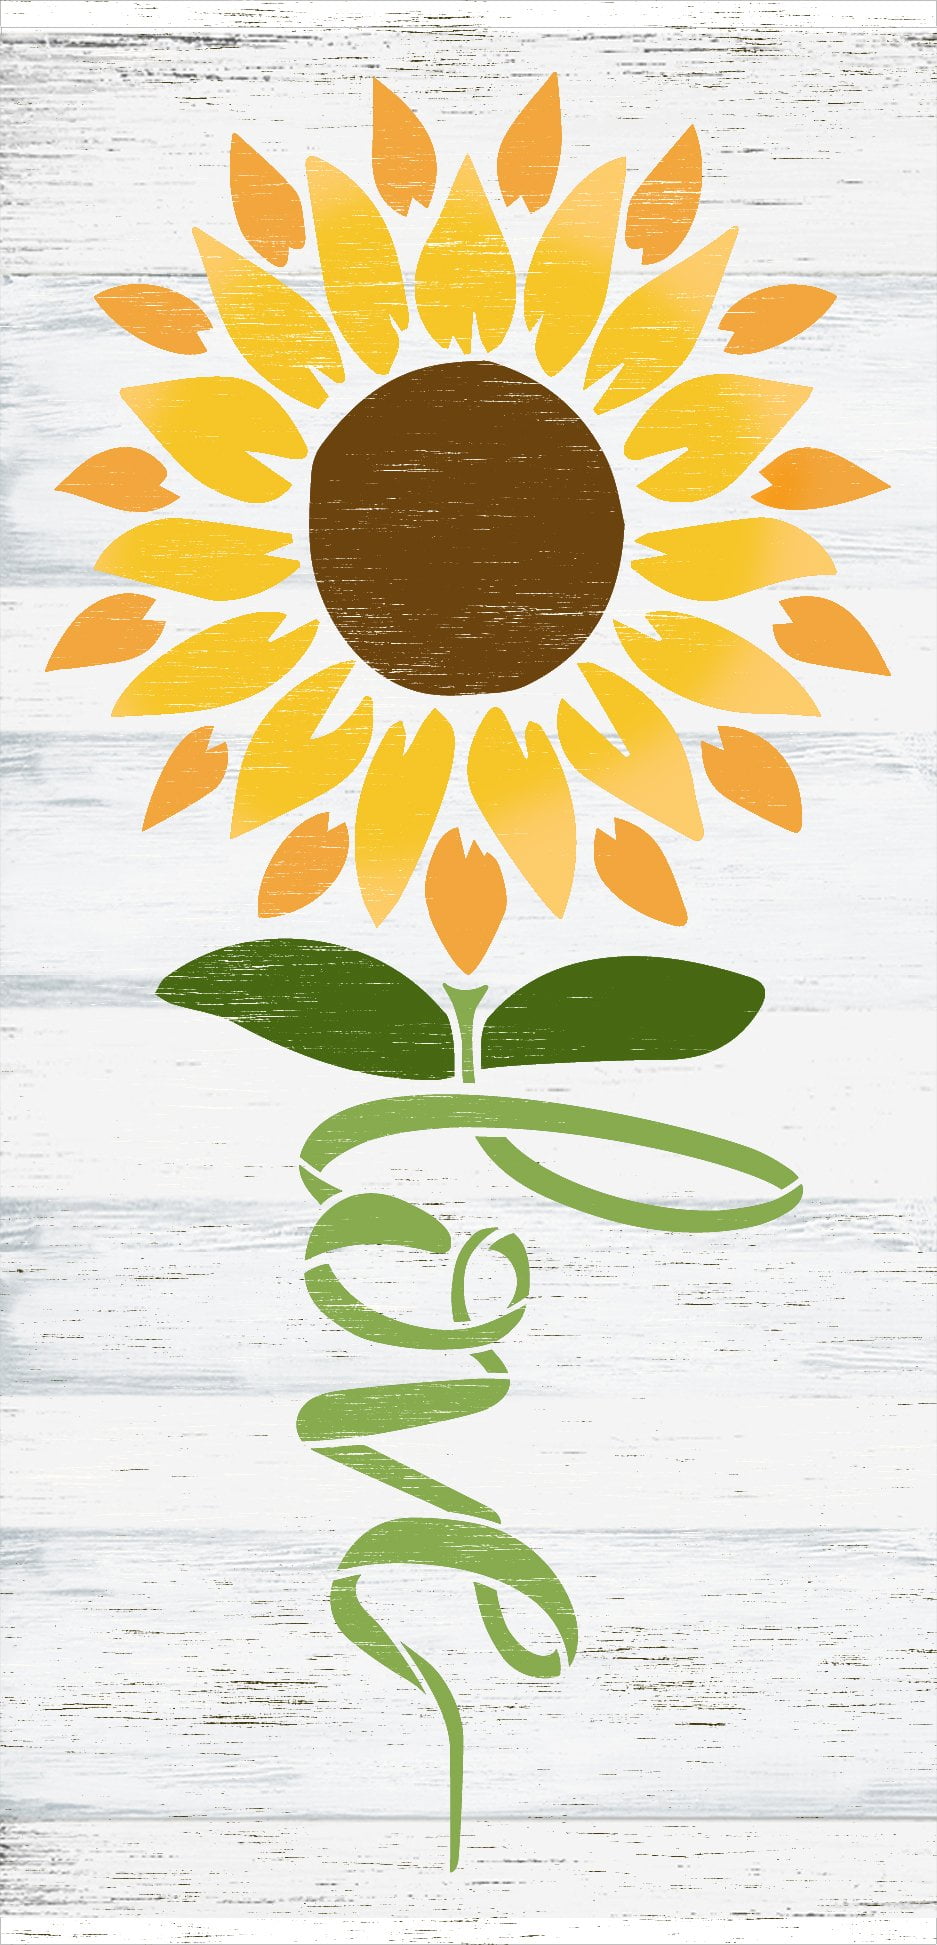 Voss Stencils for Painting Wood & Reusable Flower Sunflower 20pcs on Home DIY